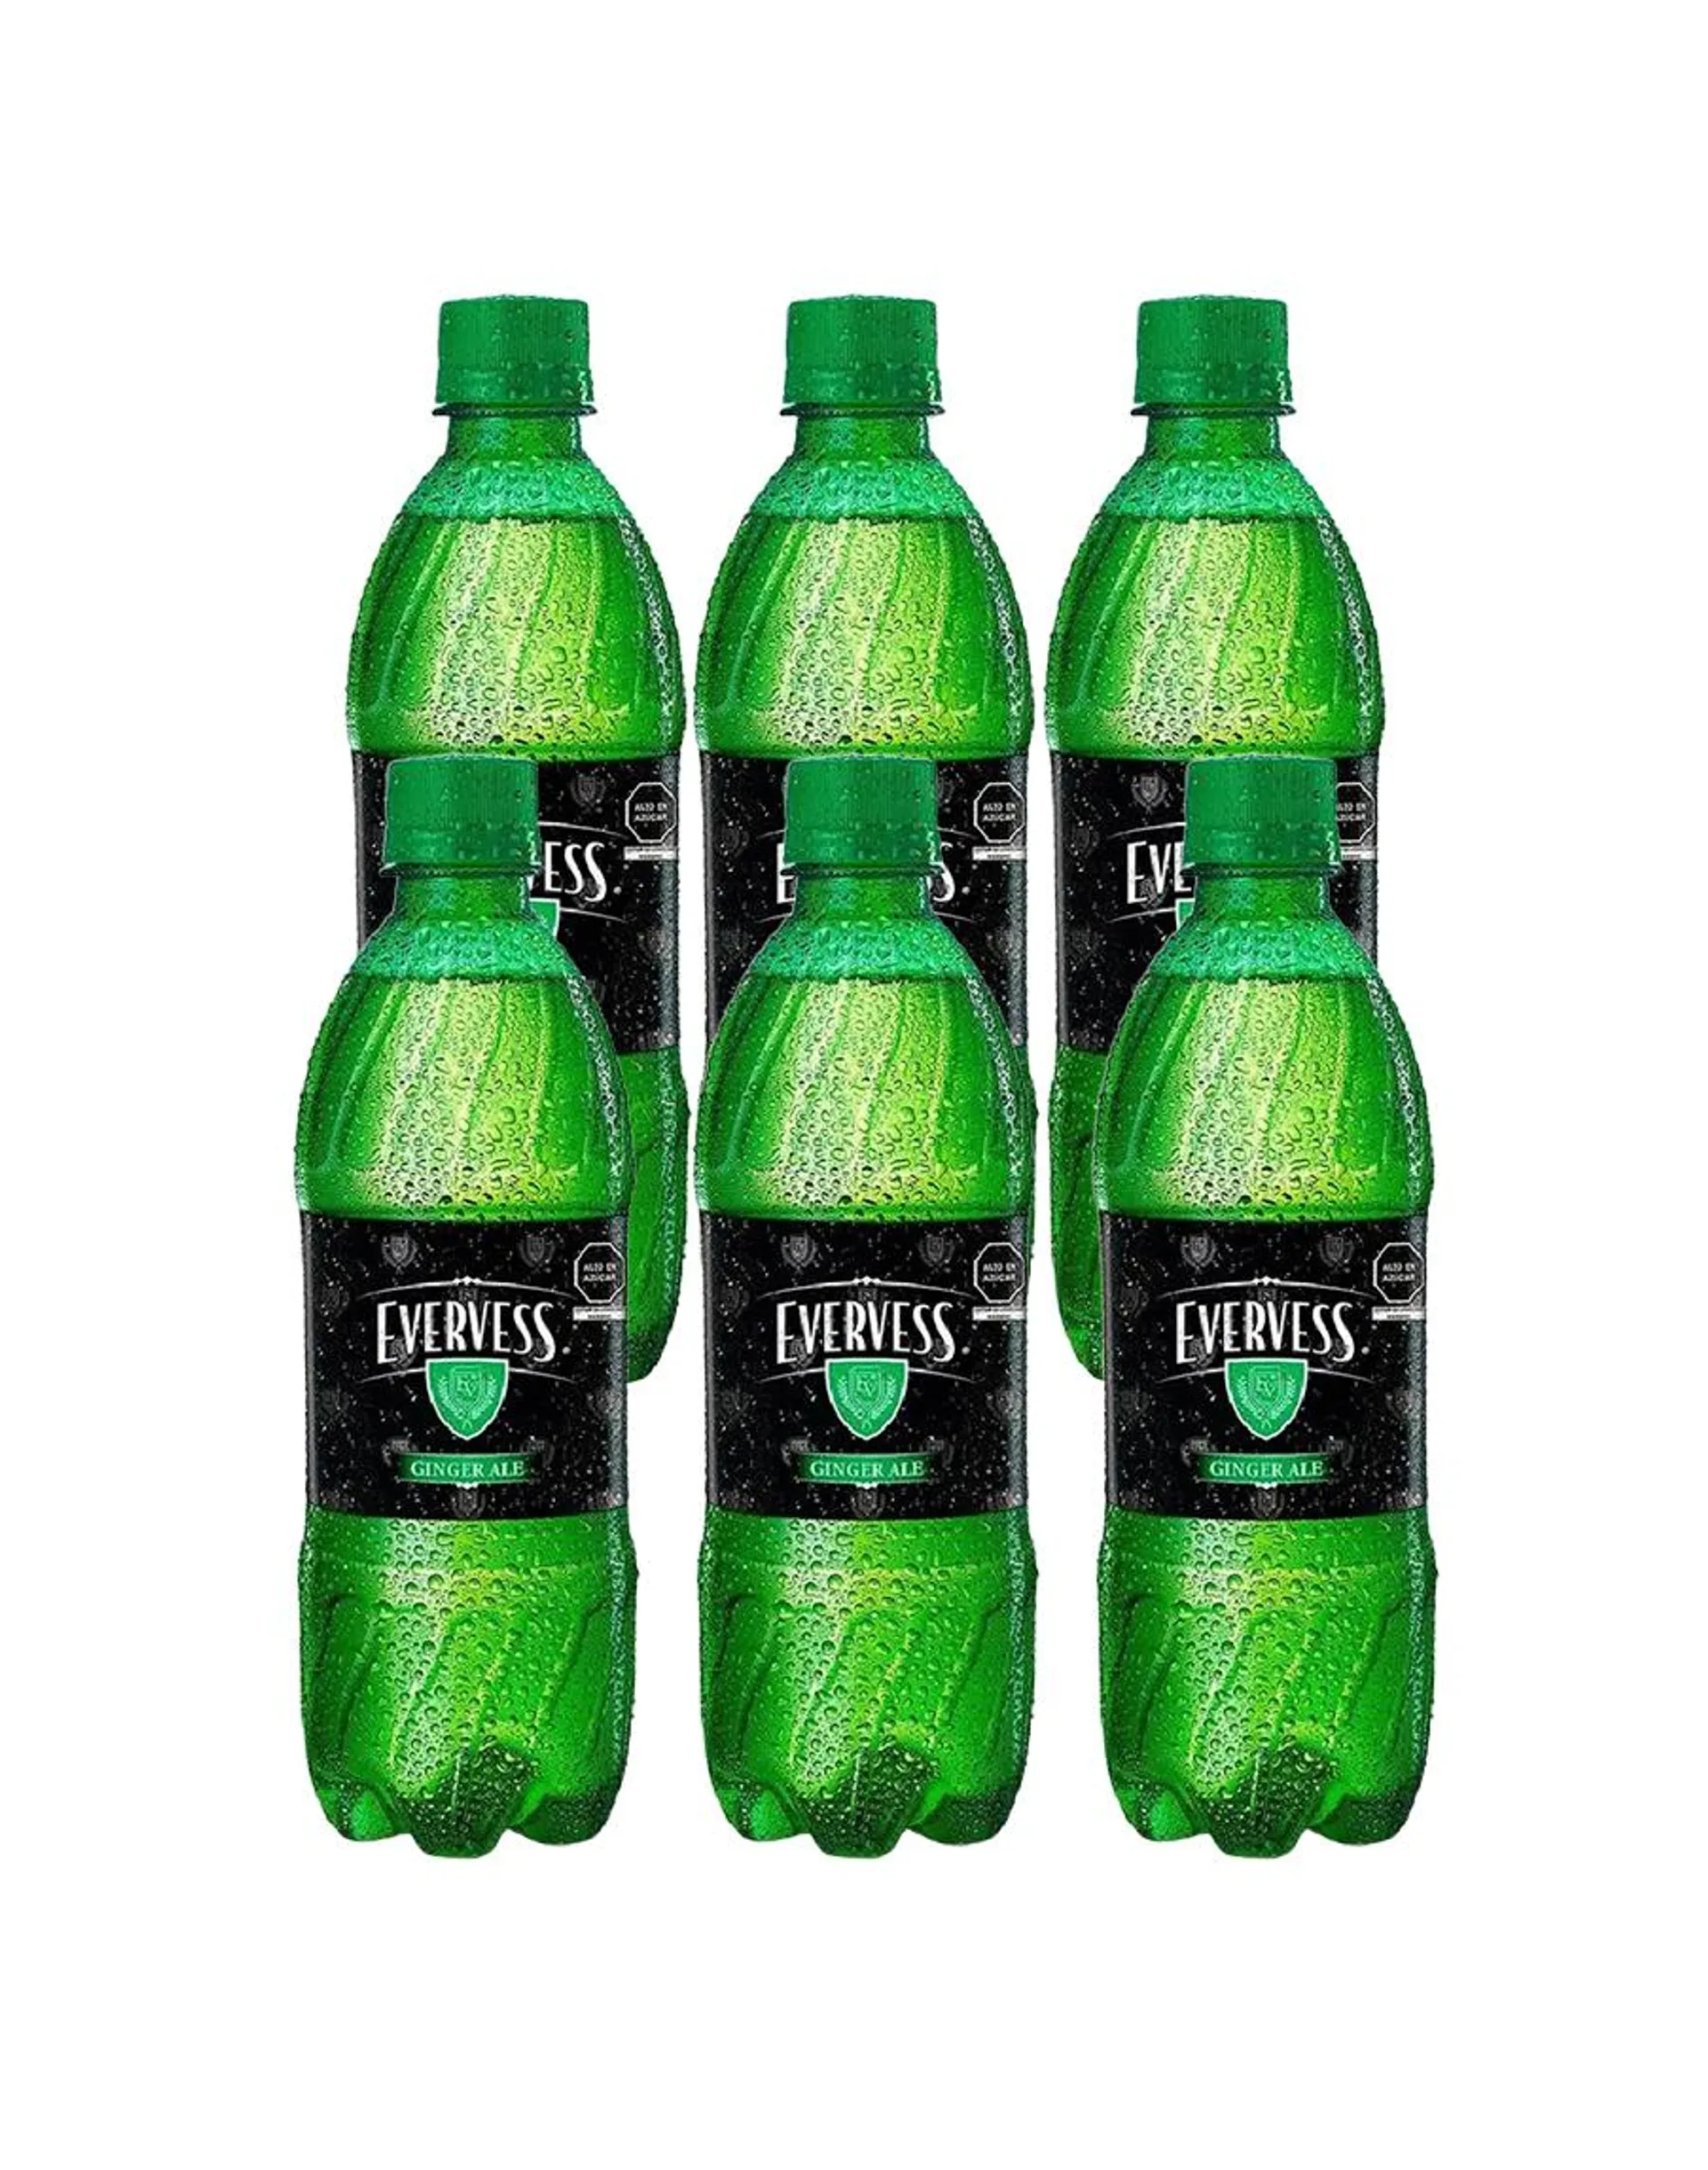 GINGER ALE EVERVESS 500ML x6